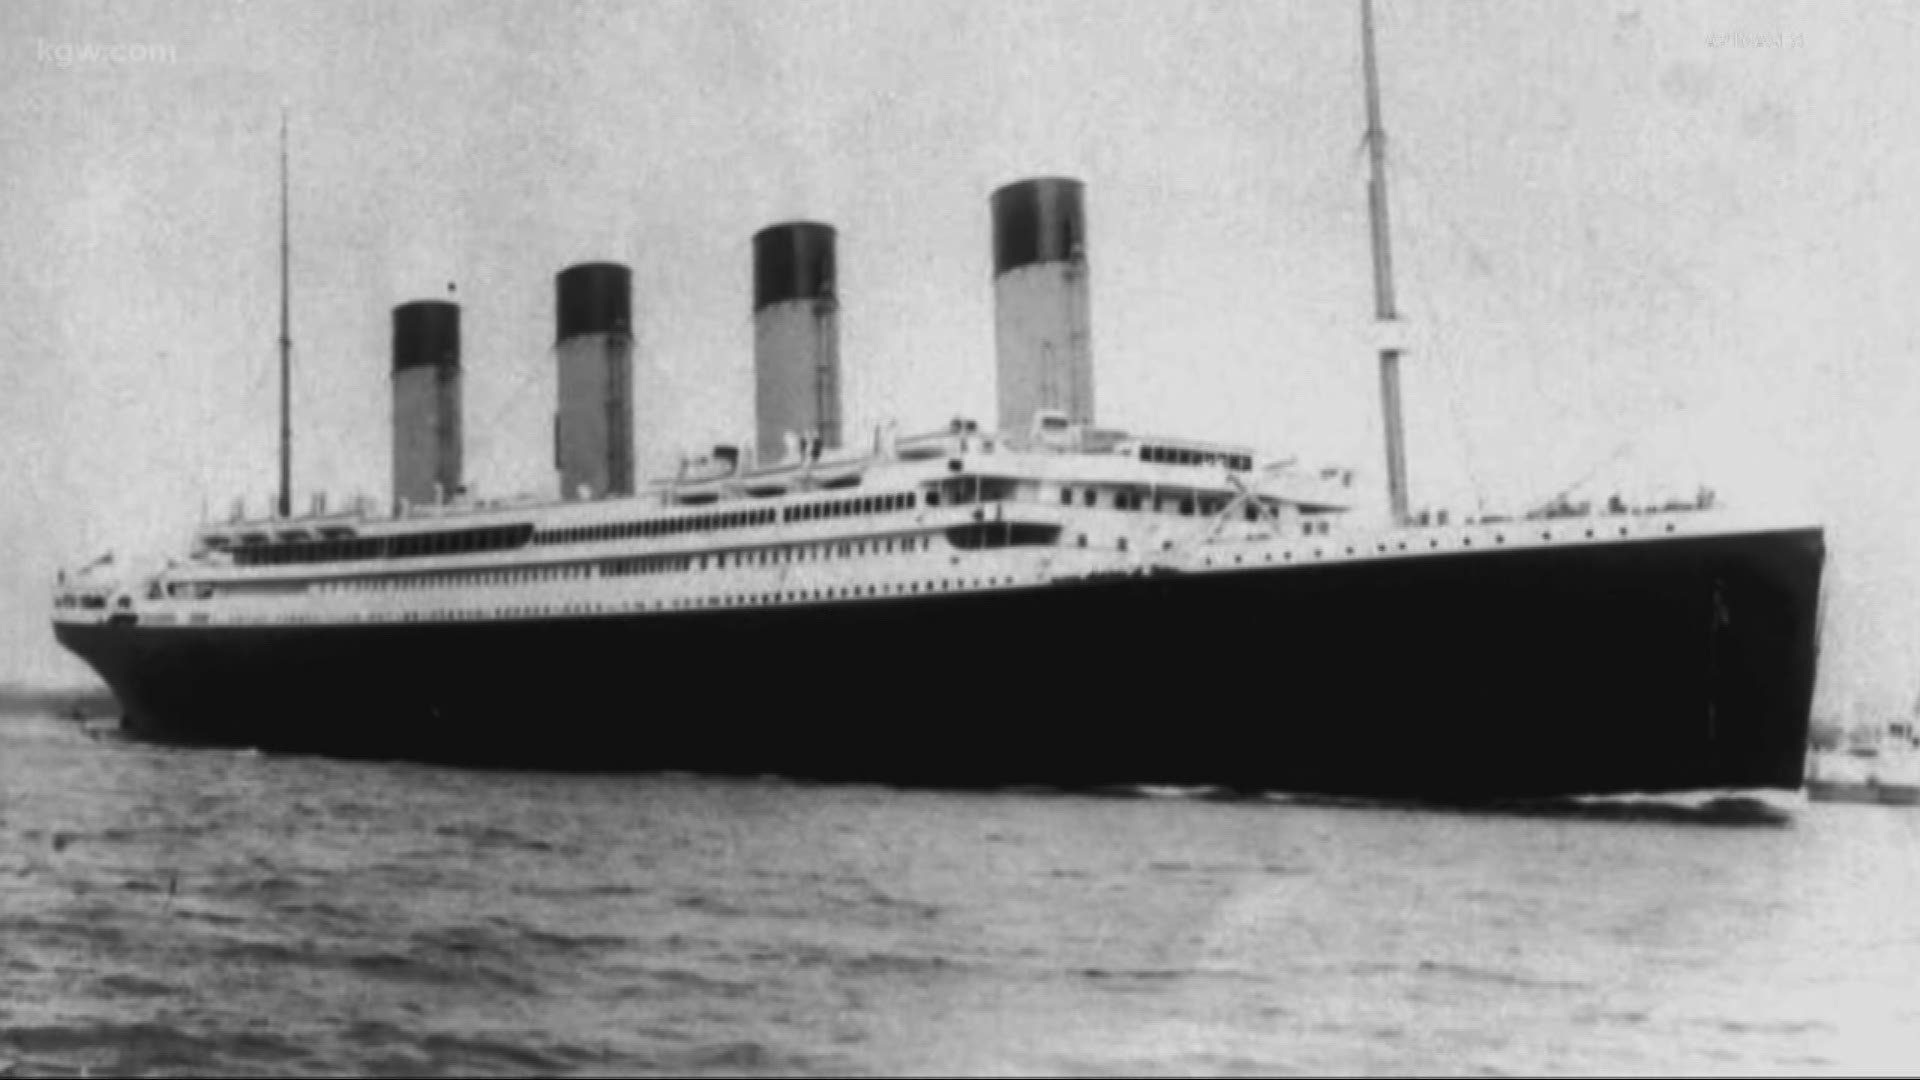 Frank Warrens great great grandparents were on the Titanic. His great great grandmother survived the most well-known disaster of the 20th century.